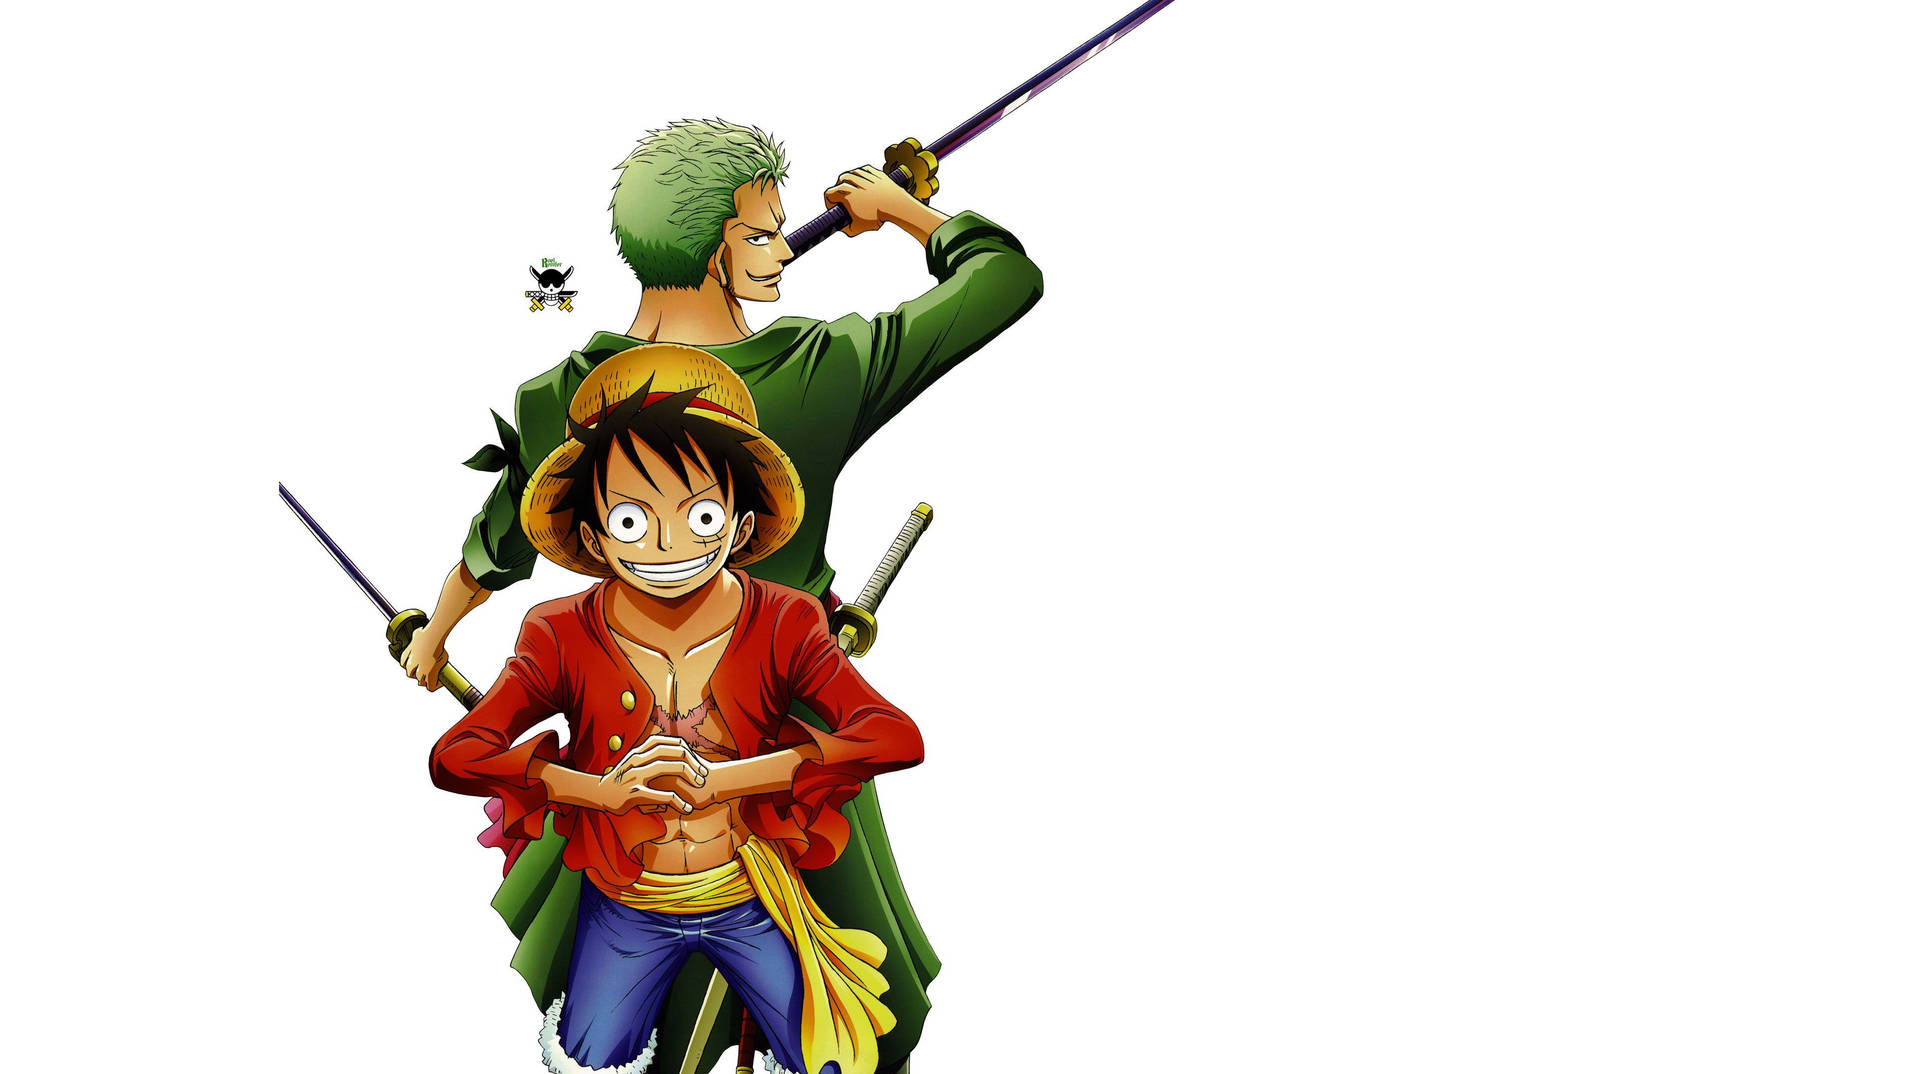 Luffy | Gear 5 | One Piece 4K Quality Background - Live Desktop Wallpapers